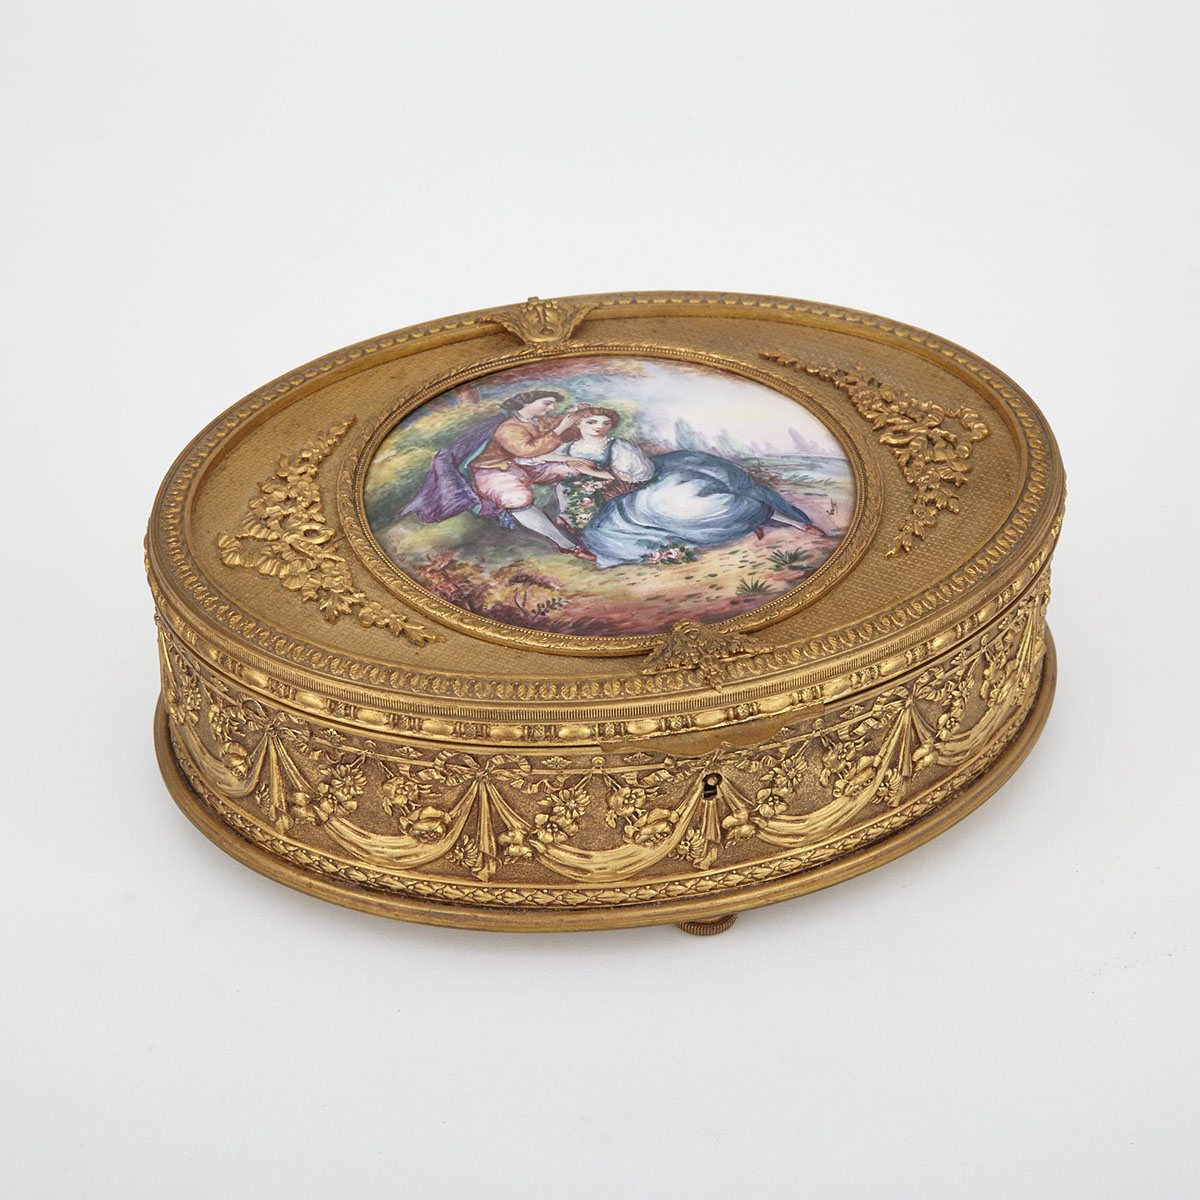 Large French Oval Porcelain Mounted Gilt Metal Jewellery Casket, early 20th century